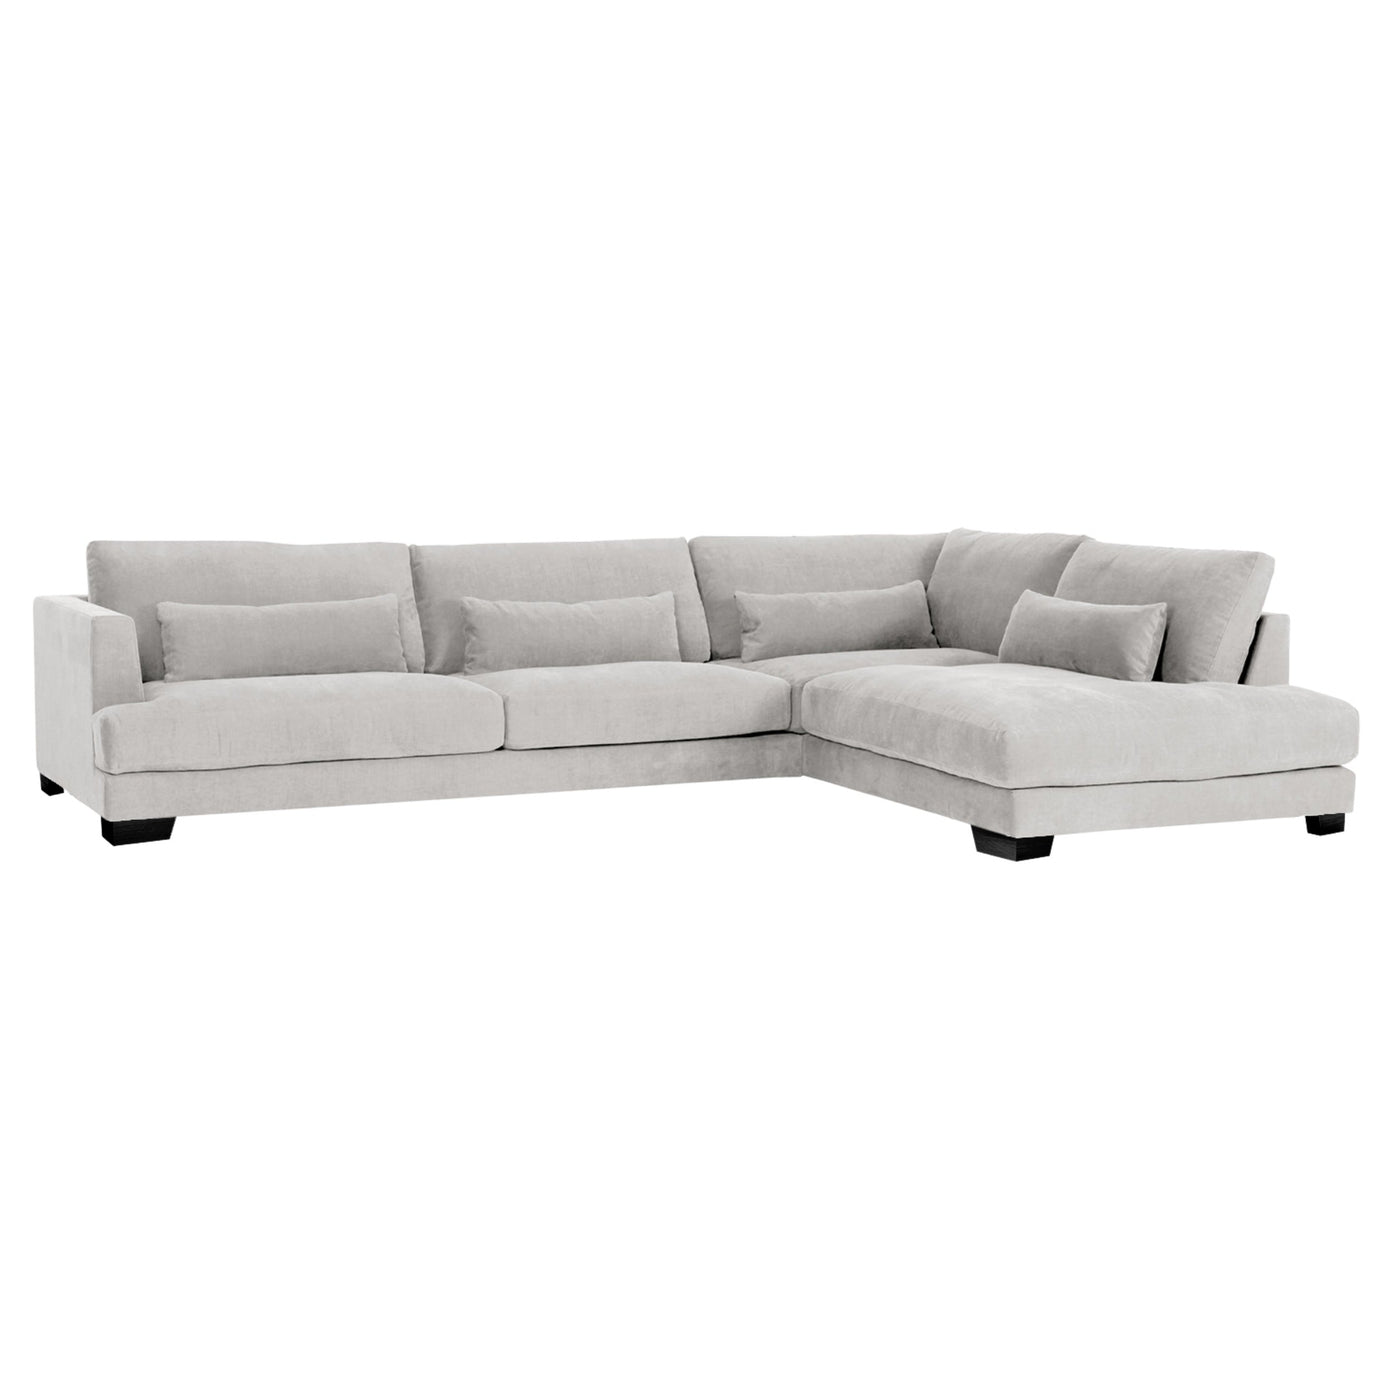 someday designs toft corner sofa in pure 03 light grey with black legs RHF. #colour_pure-03-light-grey